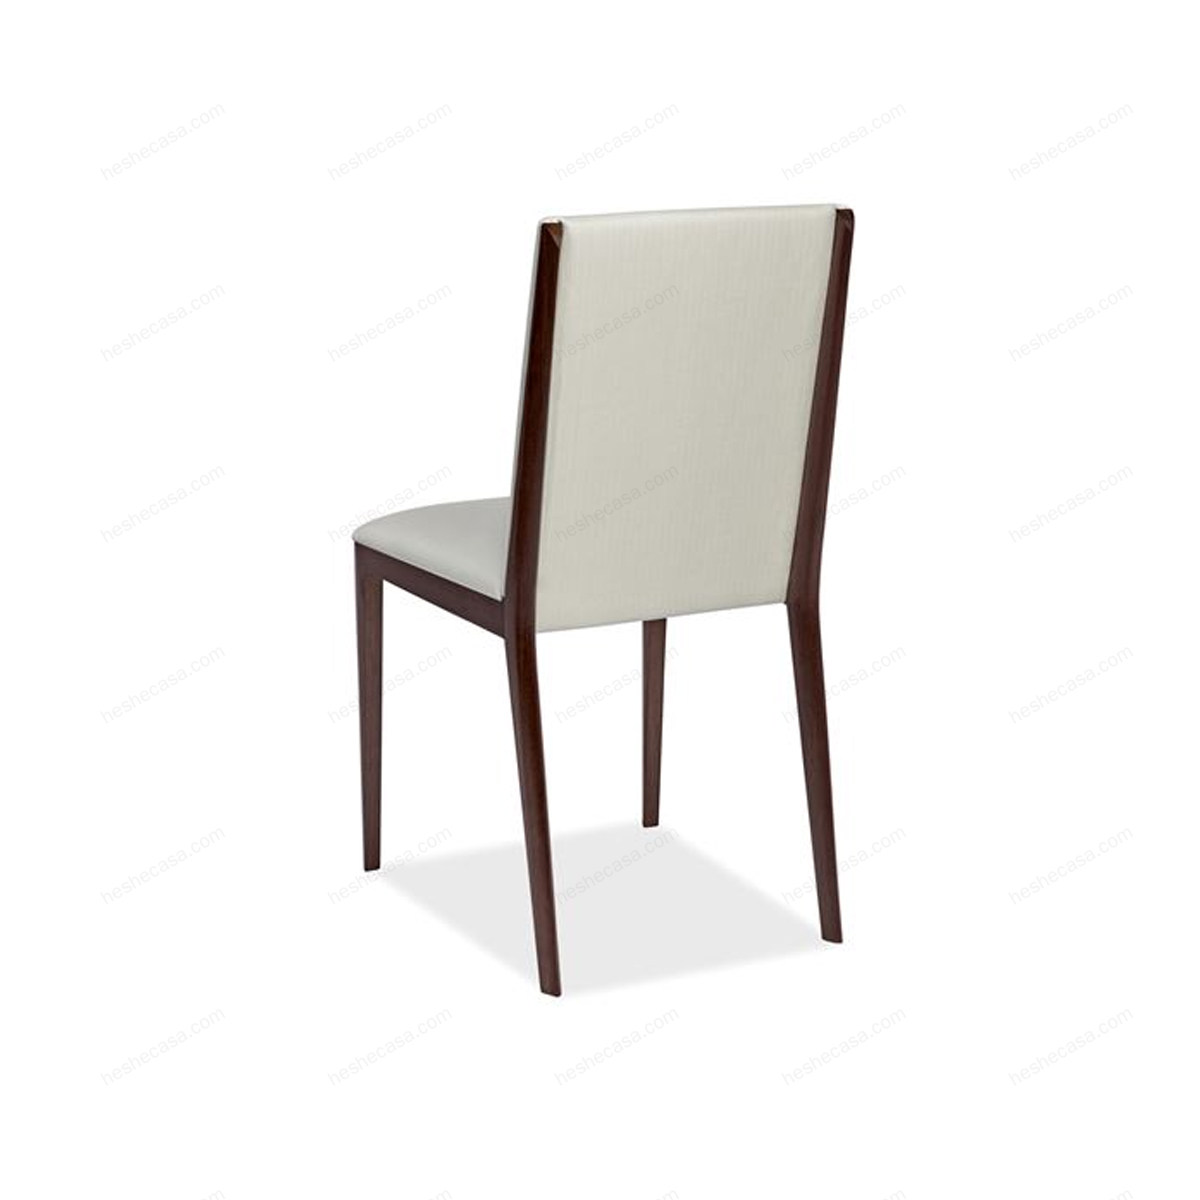 Omage Chair Without Armrests单椅